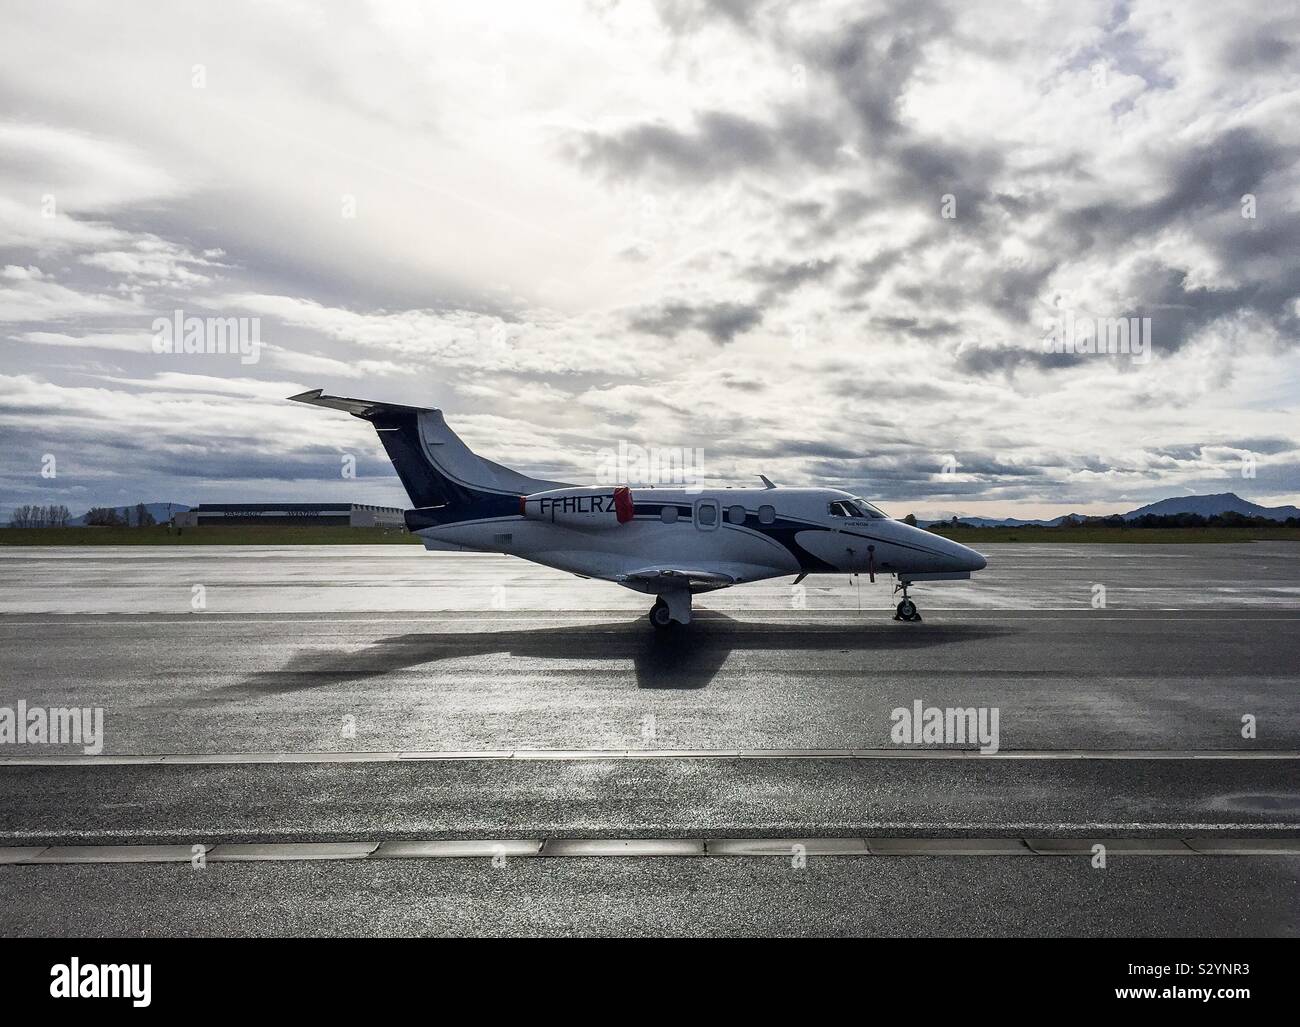 Embraer Phenom 100 private plane at Biarritz airport, France. Stock Photo